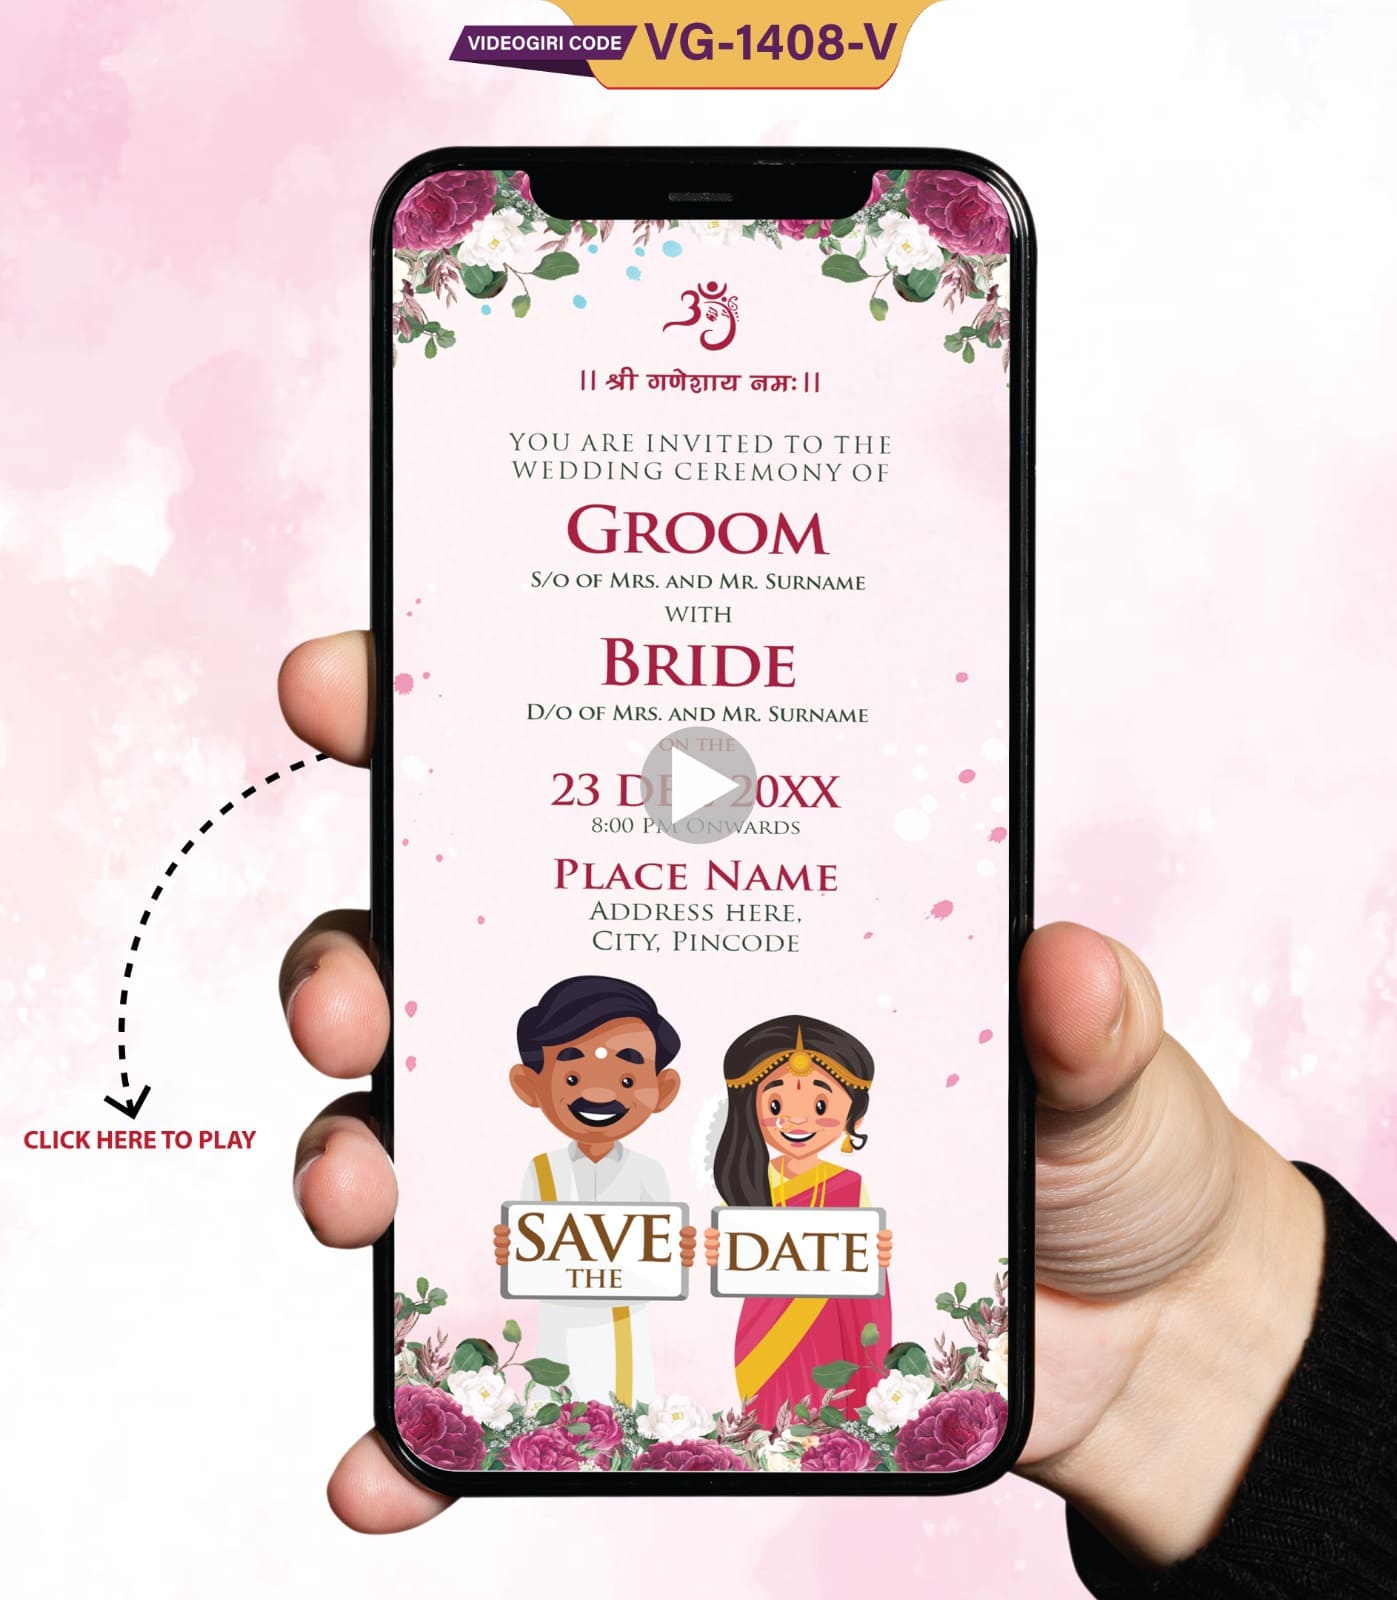 South Indian Wedding Invitation Video Online